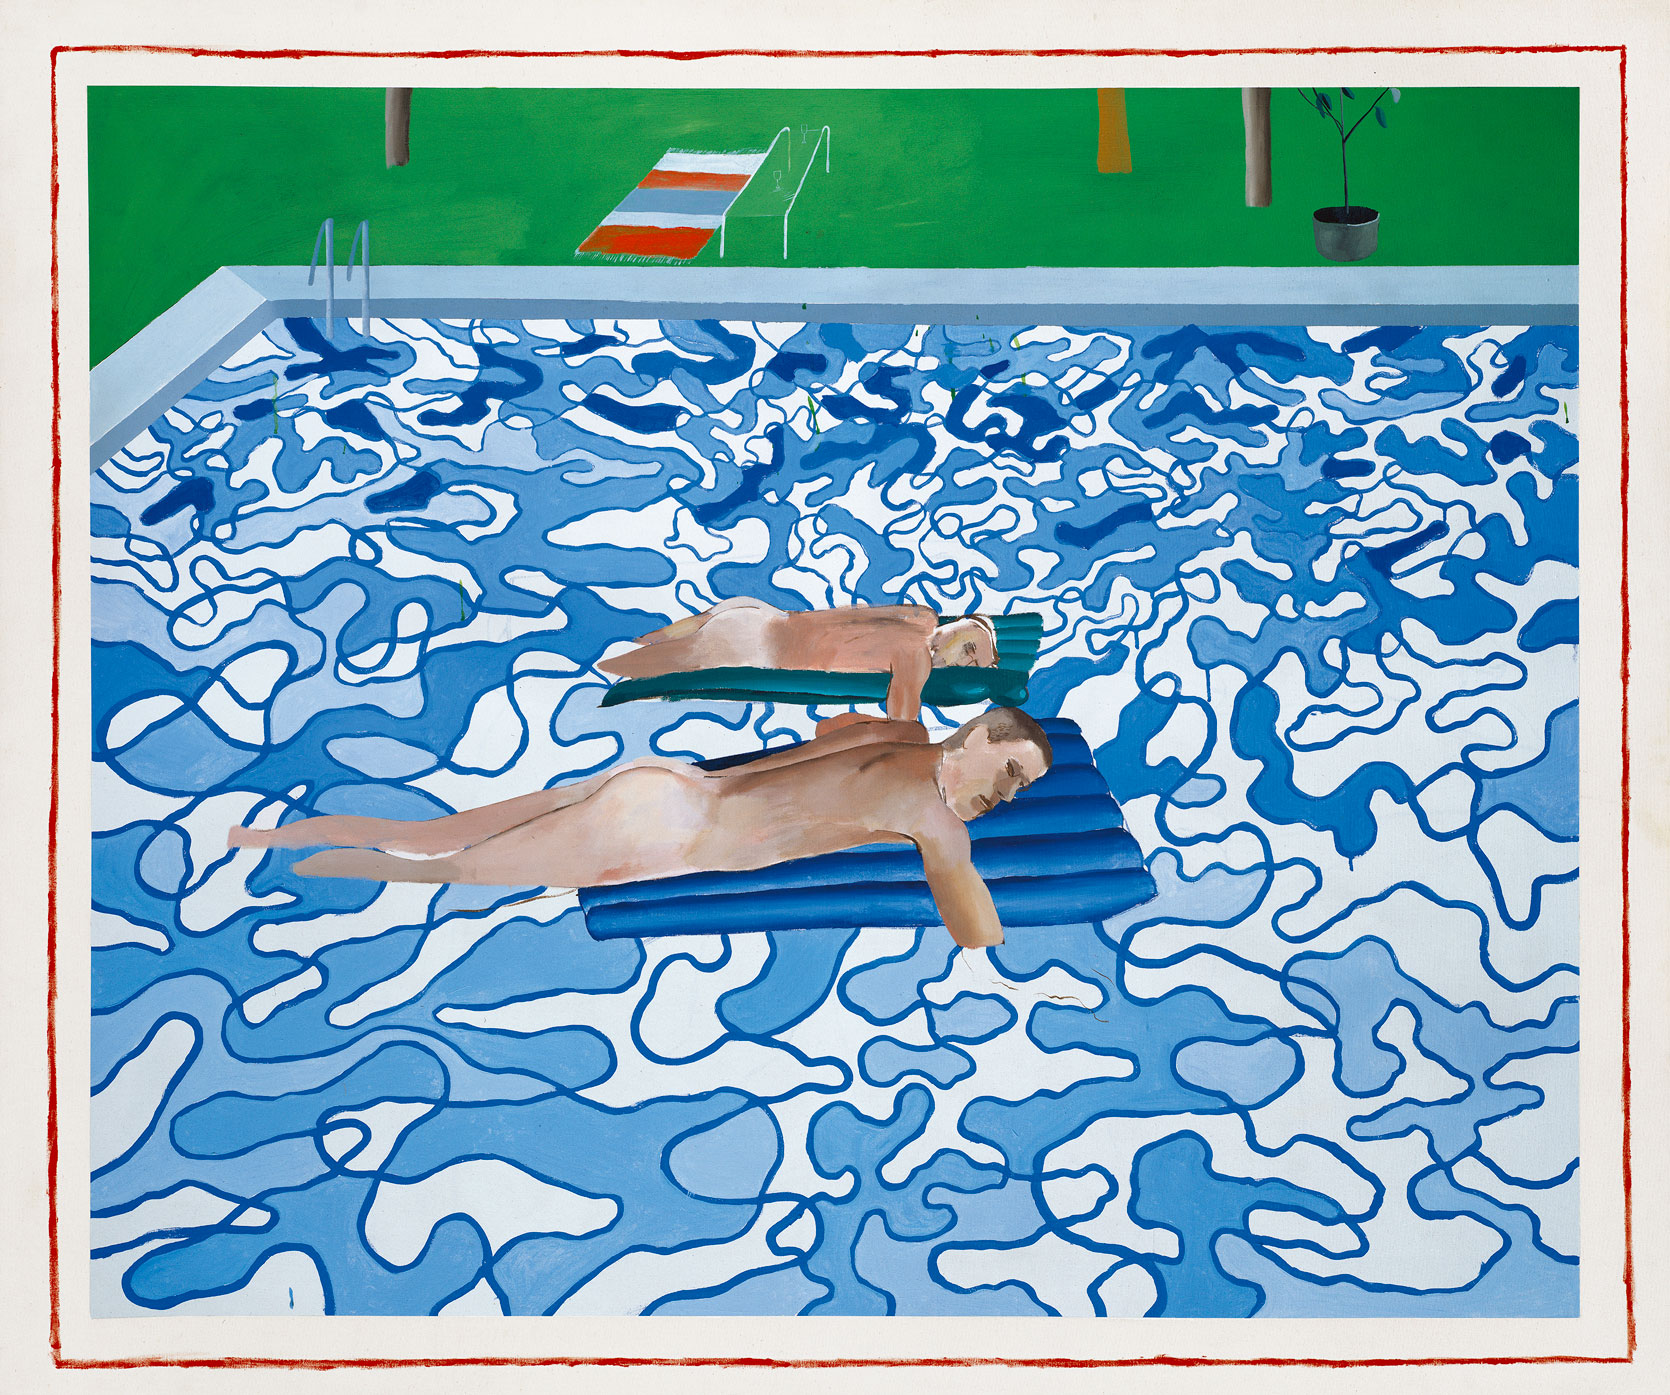 David Hockney, California copied from a 1965 painting in 1987. Source: Lacma